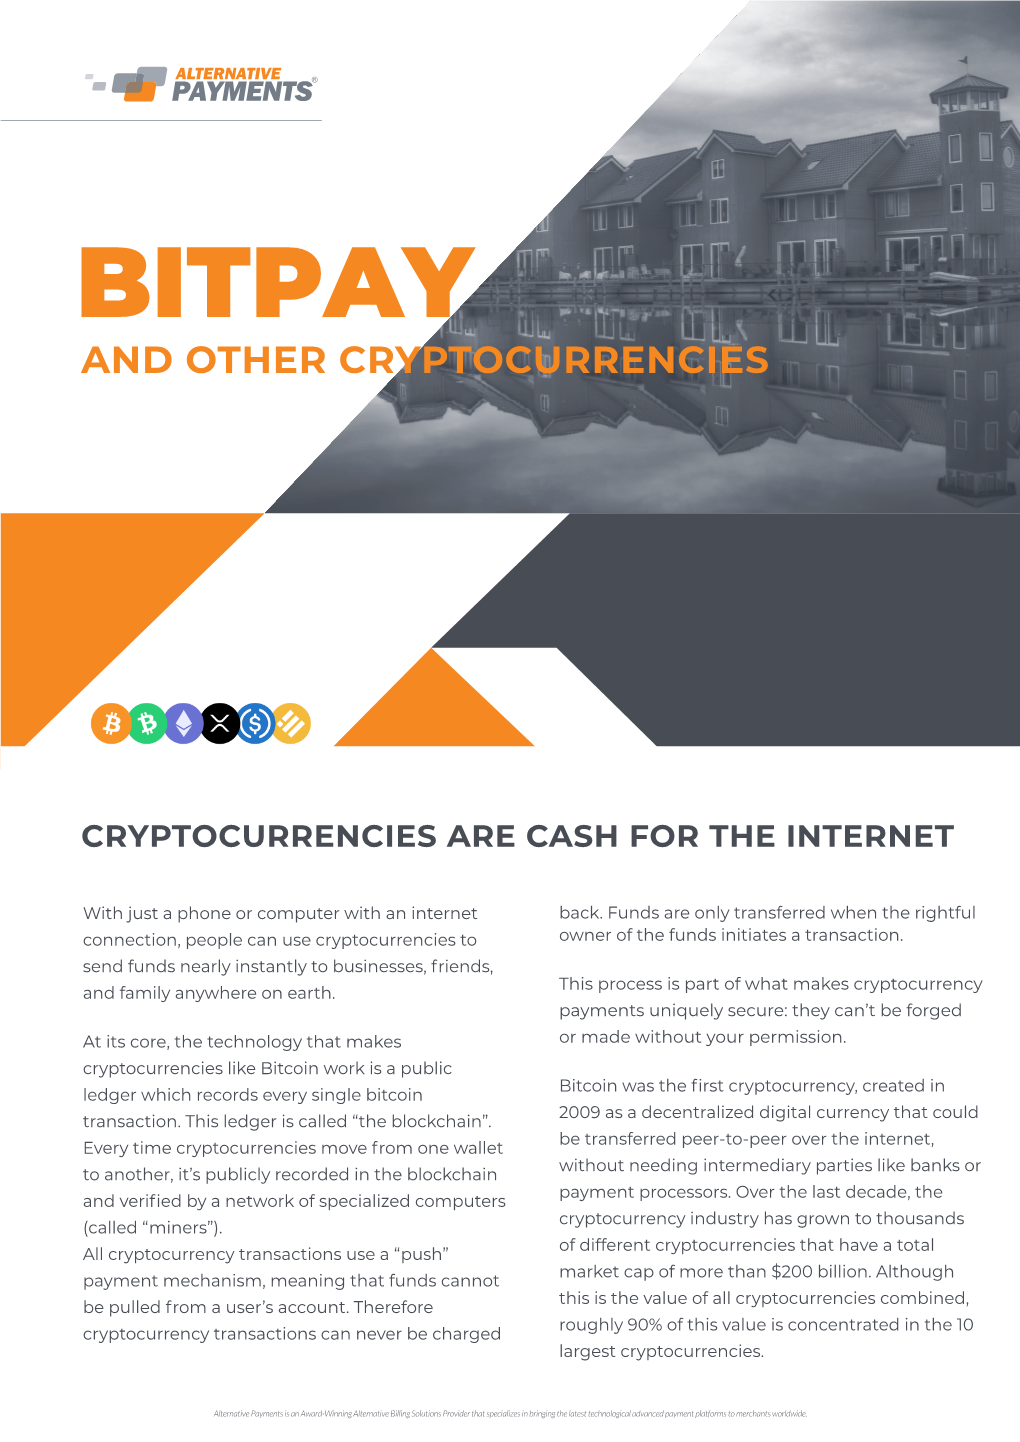 Bitpay and Other Cryptocurrencies